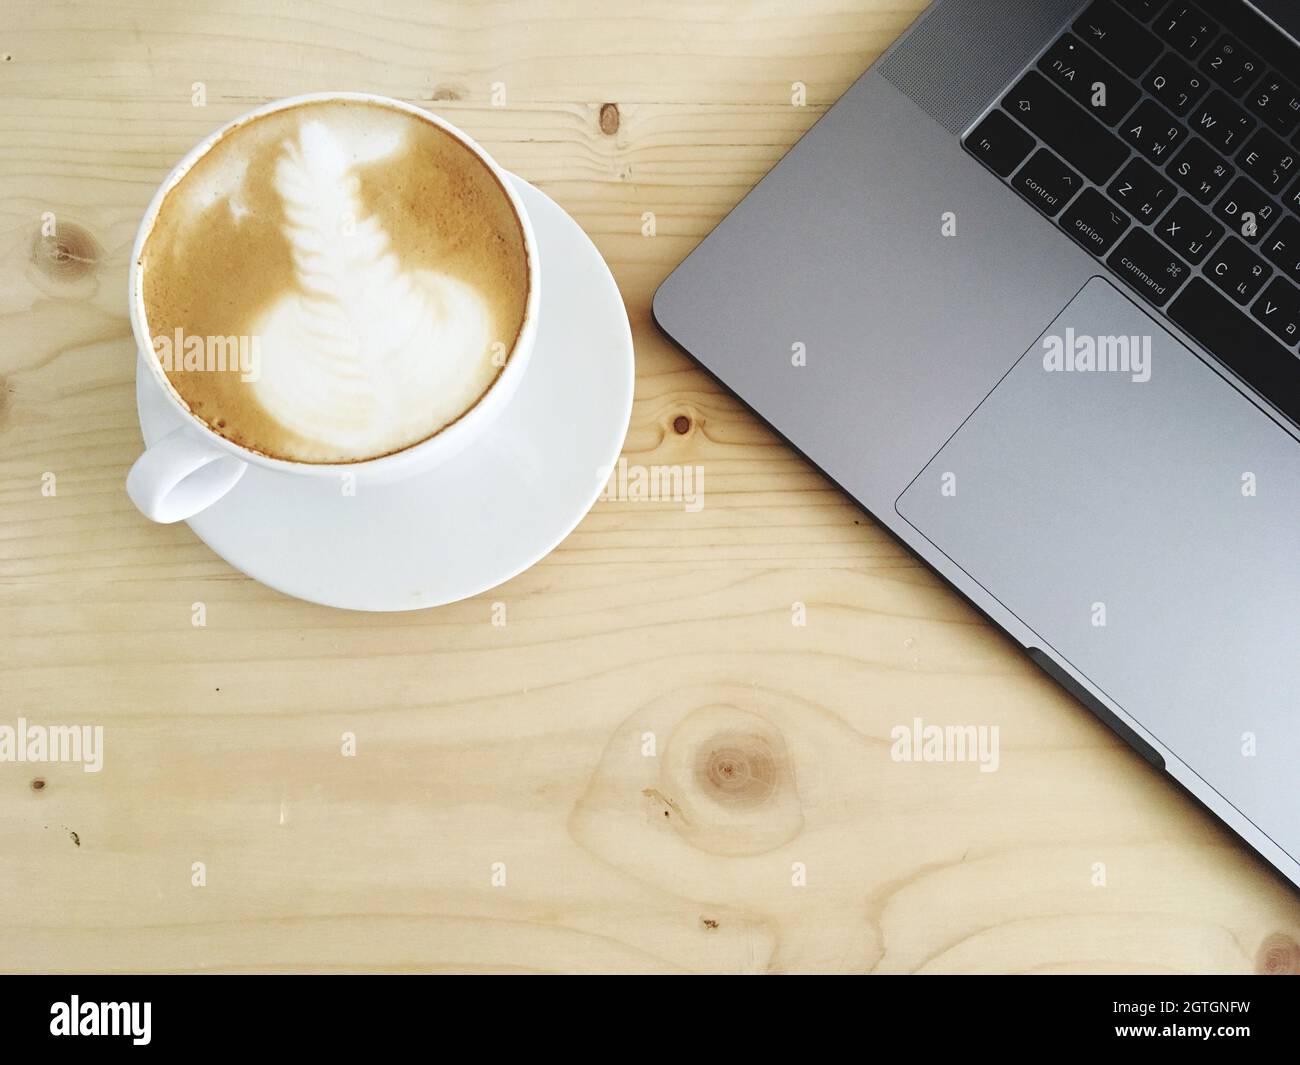 High Angle View Of Coffee And Laptop On Table Stock Photo